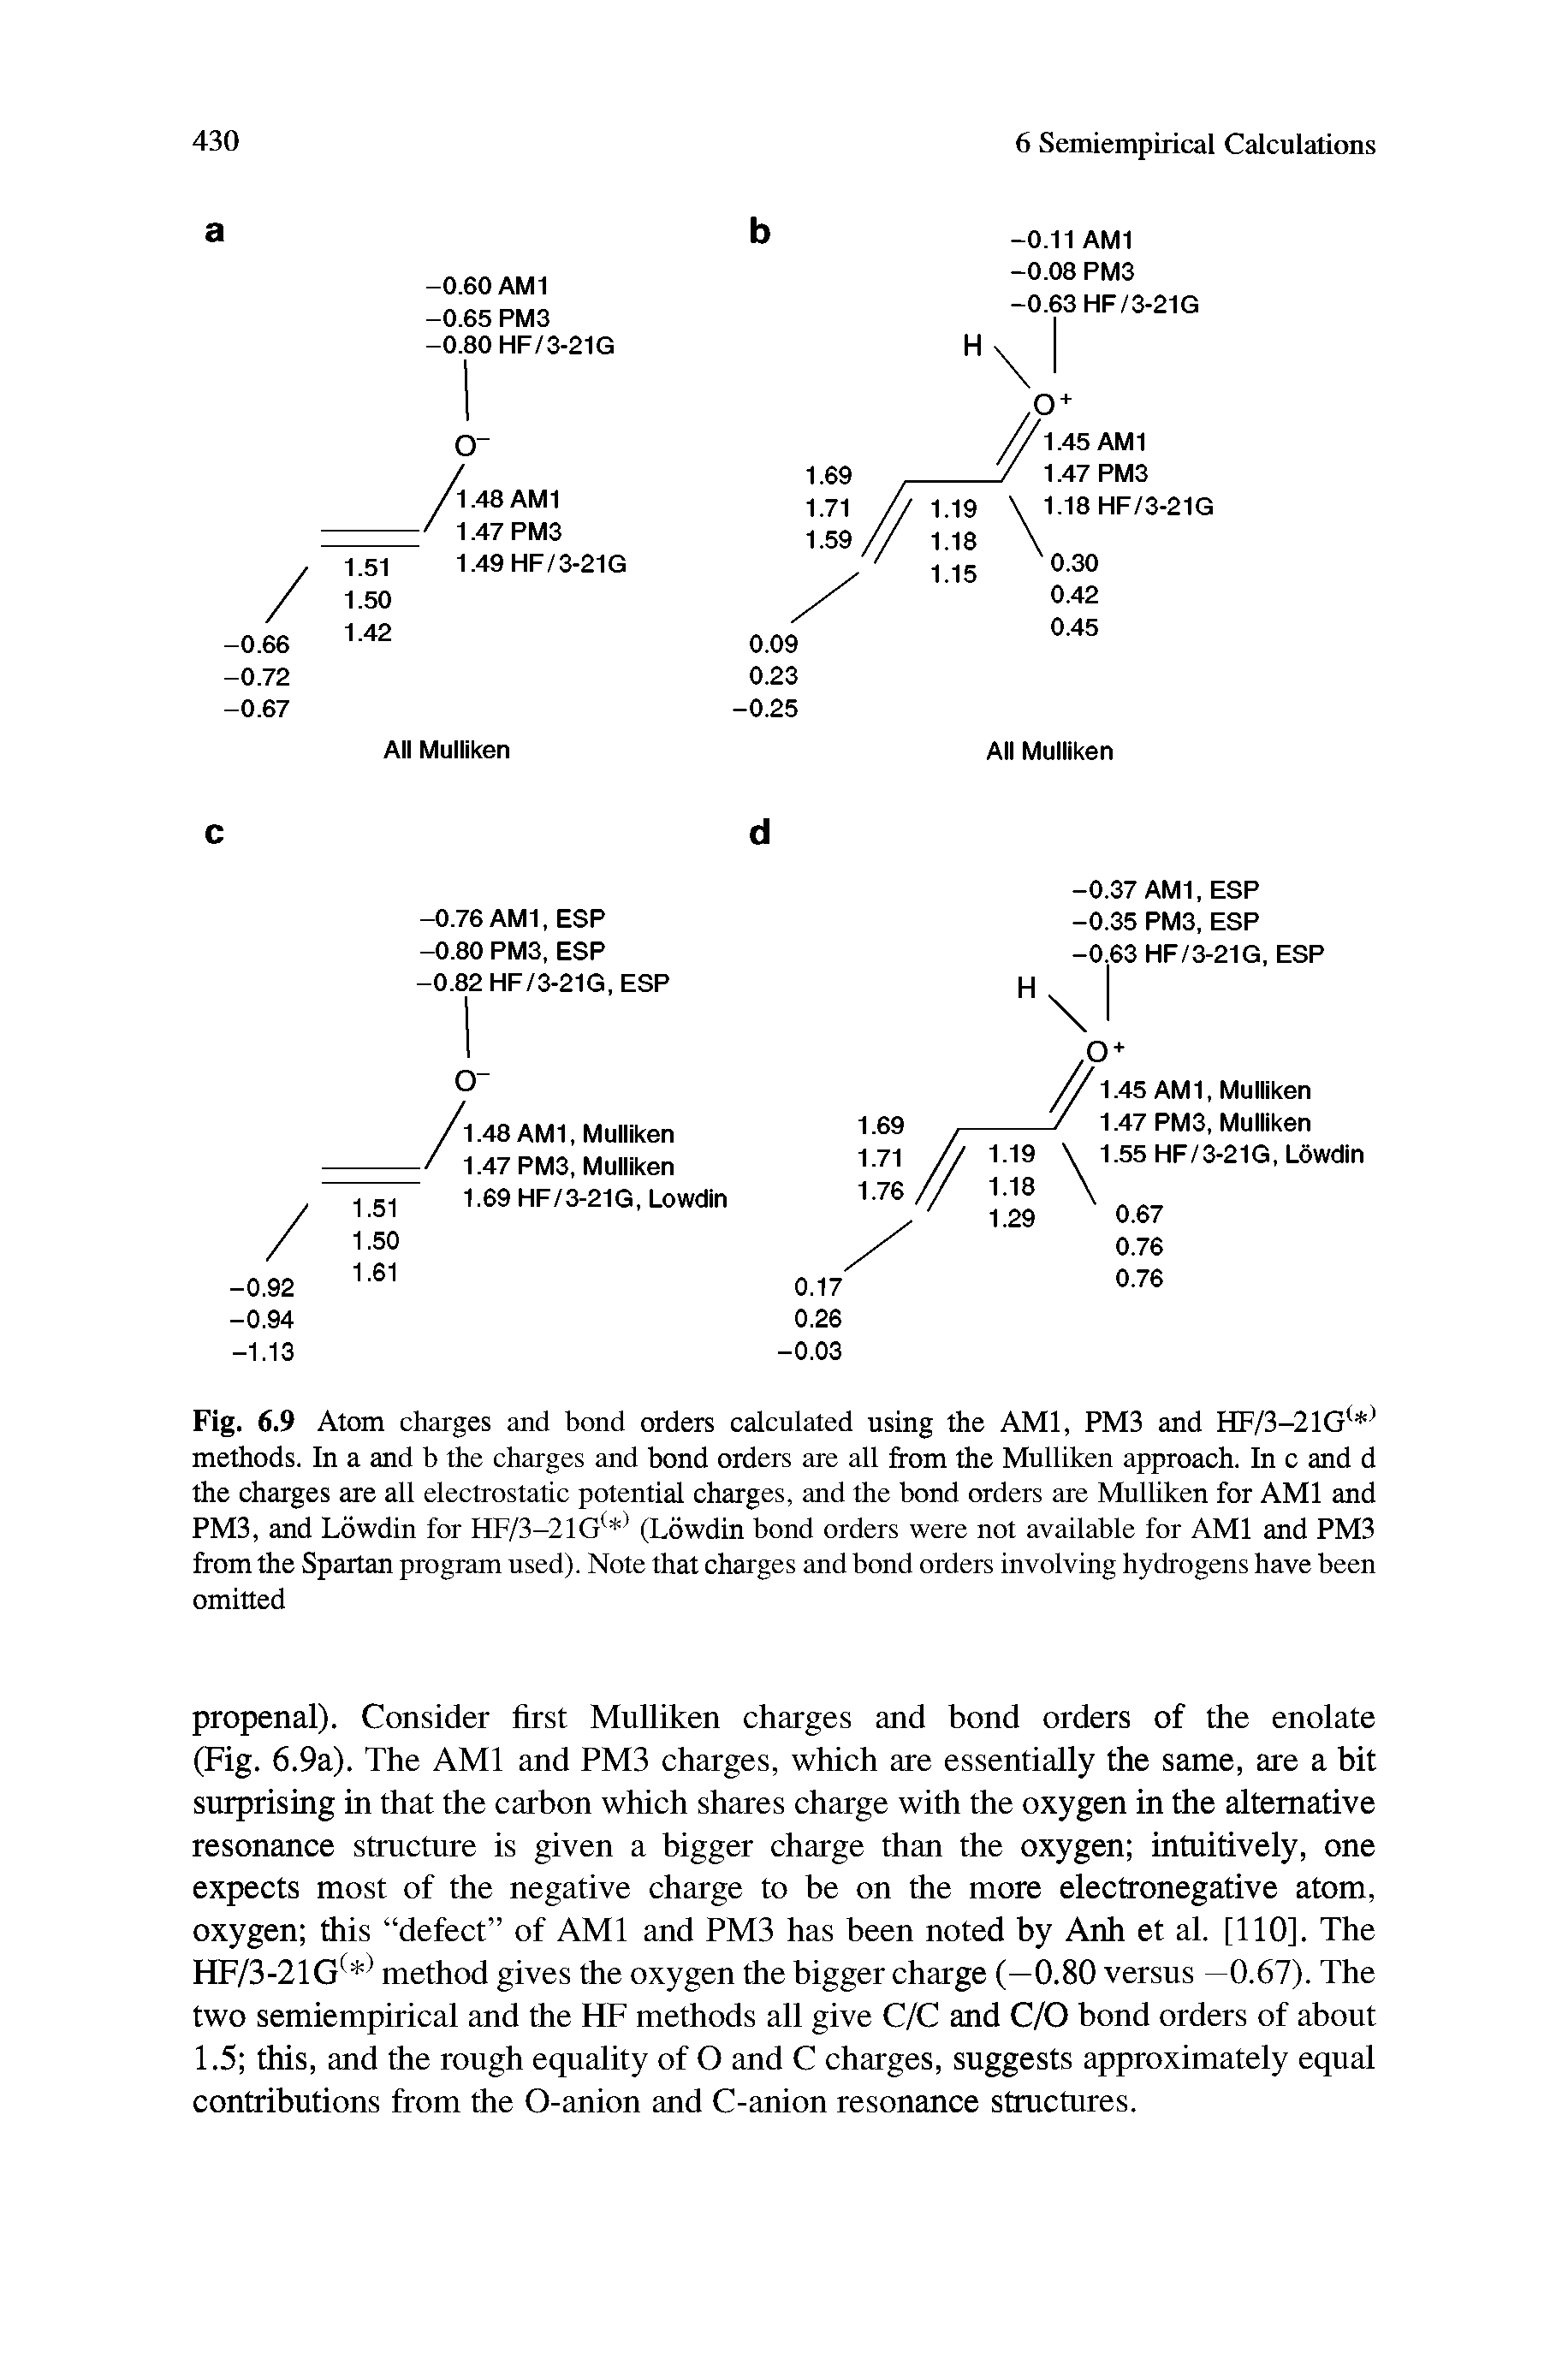 Fig. 6.9 Atom charges and bond orders calculated using the AMI, PM3 and HF/3-21G( ) methods. In a and b the charges and bond orders are all from the Mulliken approach. In c and d the charges are all electrostatic potential charges, and the bond orders are Mulliken for AMI and PM3, and Lowdin for HF/3-21G< ) (Lowdin bond orders were not available for AMI and PM3 from the Spartan program used). Note that charges and bond orders involving hydrogens have been omitted...